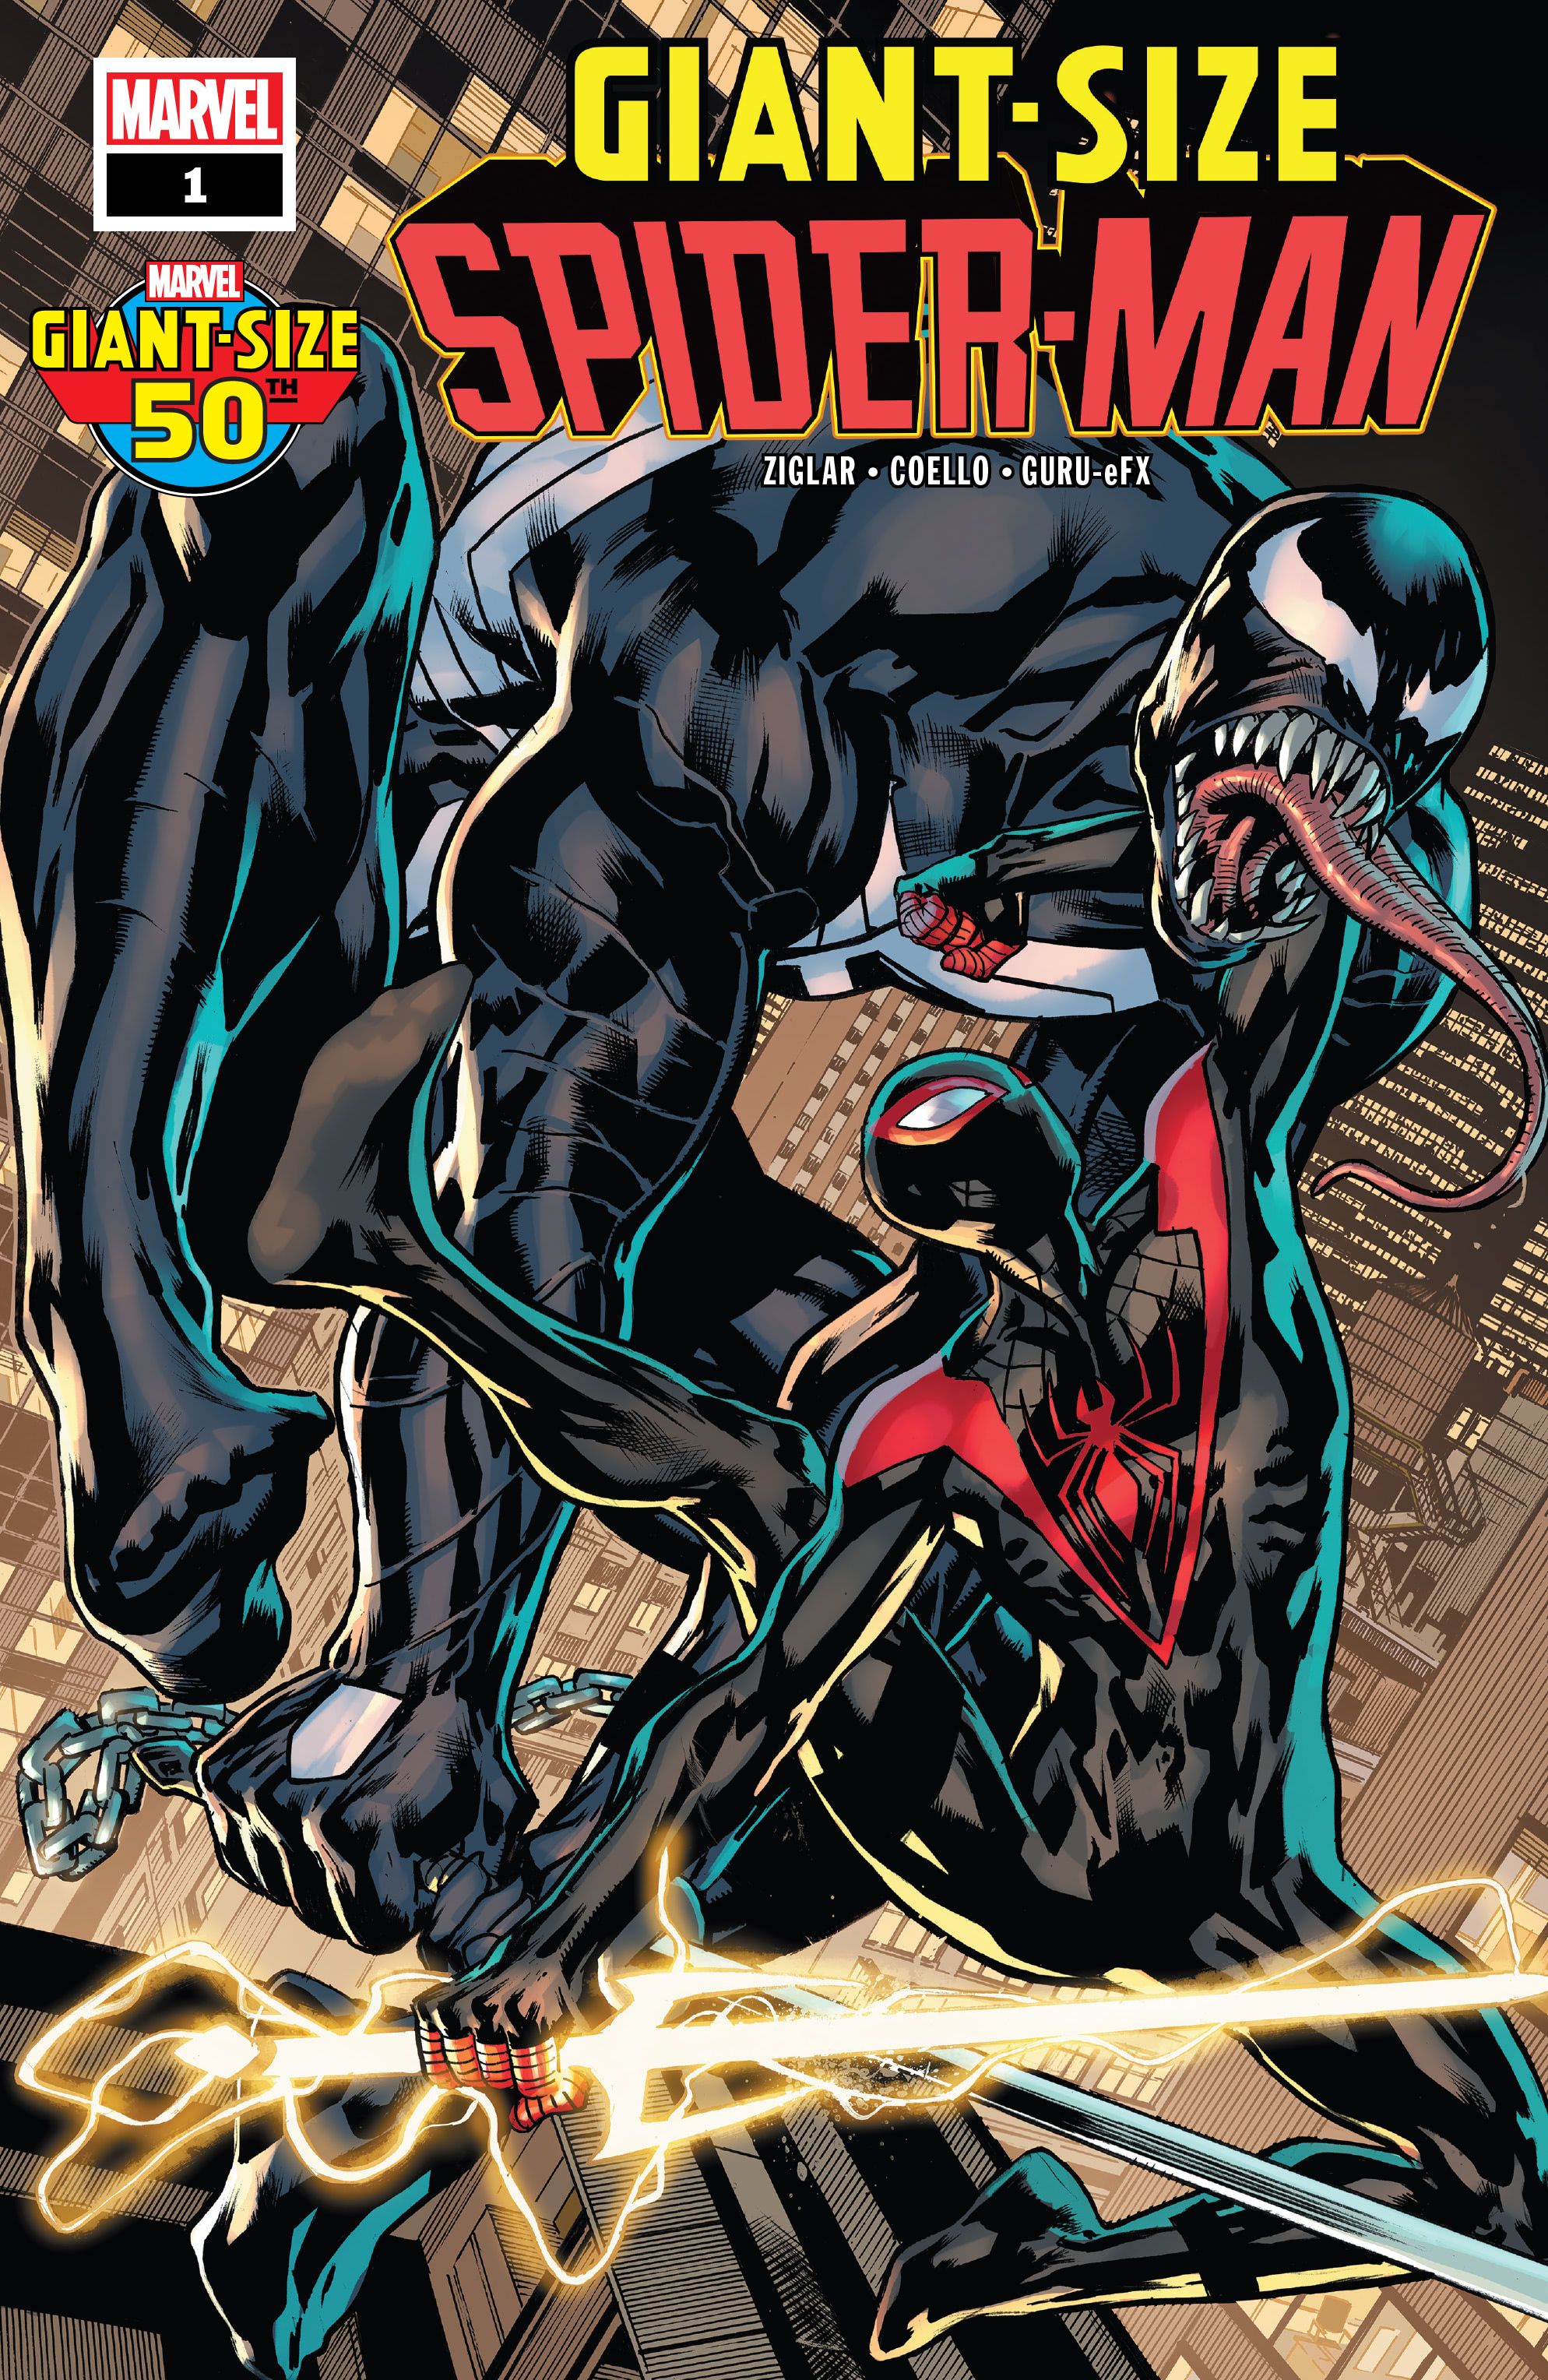 Giant-Size Spider-Man #1 Cover A shows Spider-Man being attacked by Venom